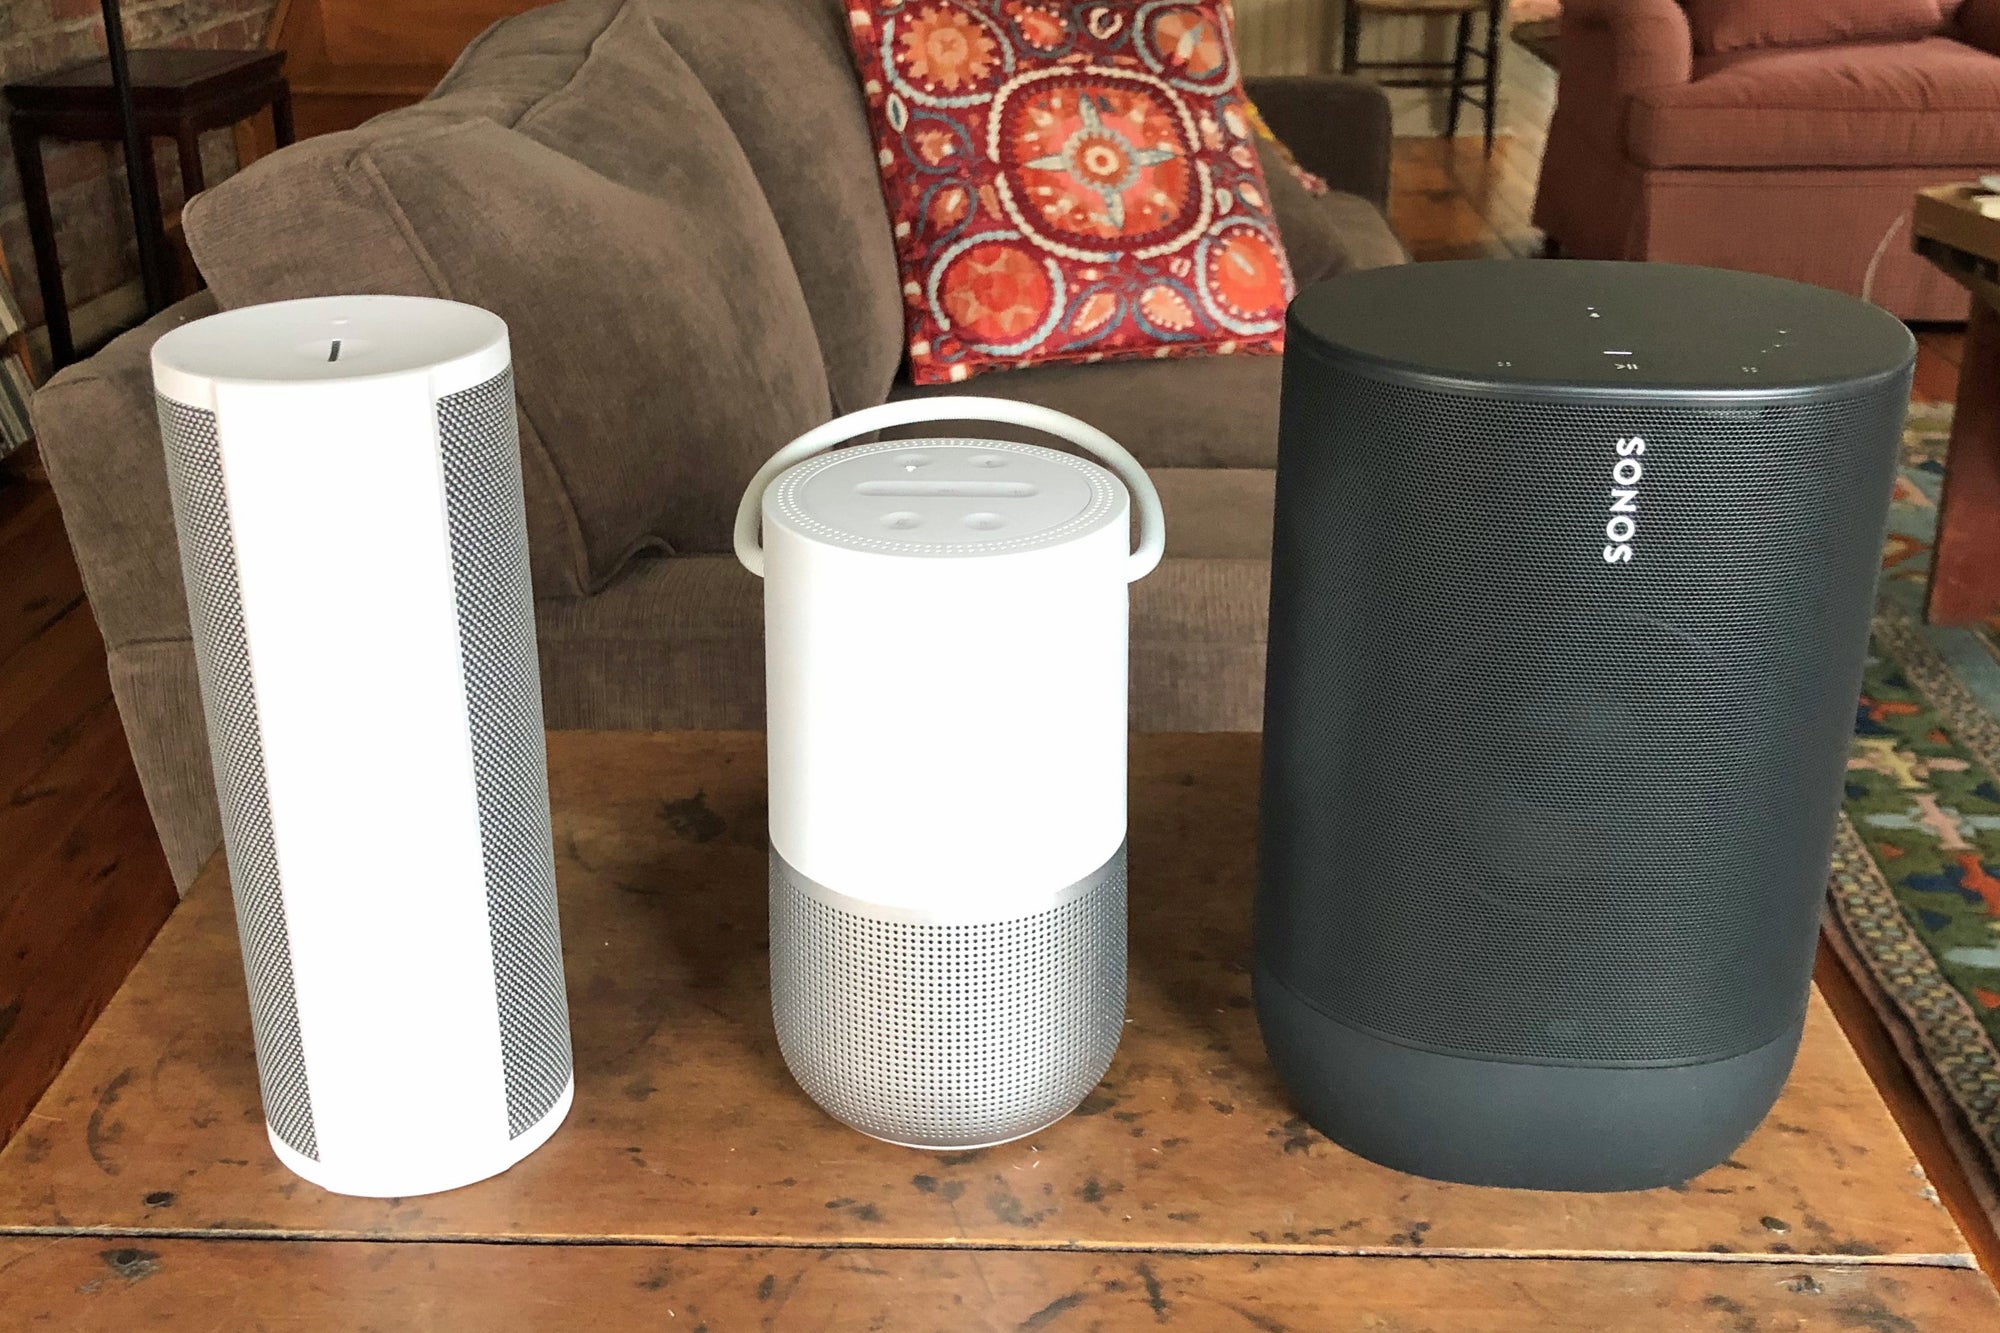 Bose Portable Home Speaker review: This mobile smart speaker is good to